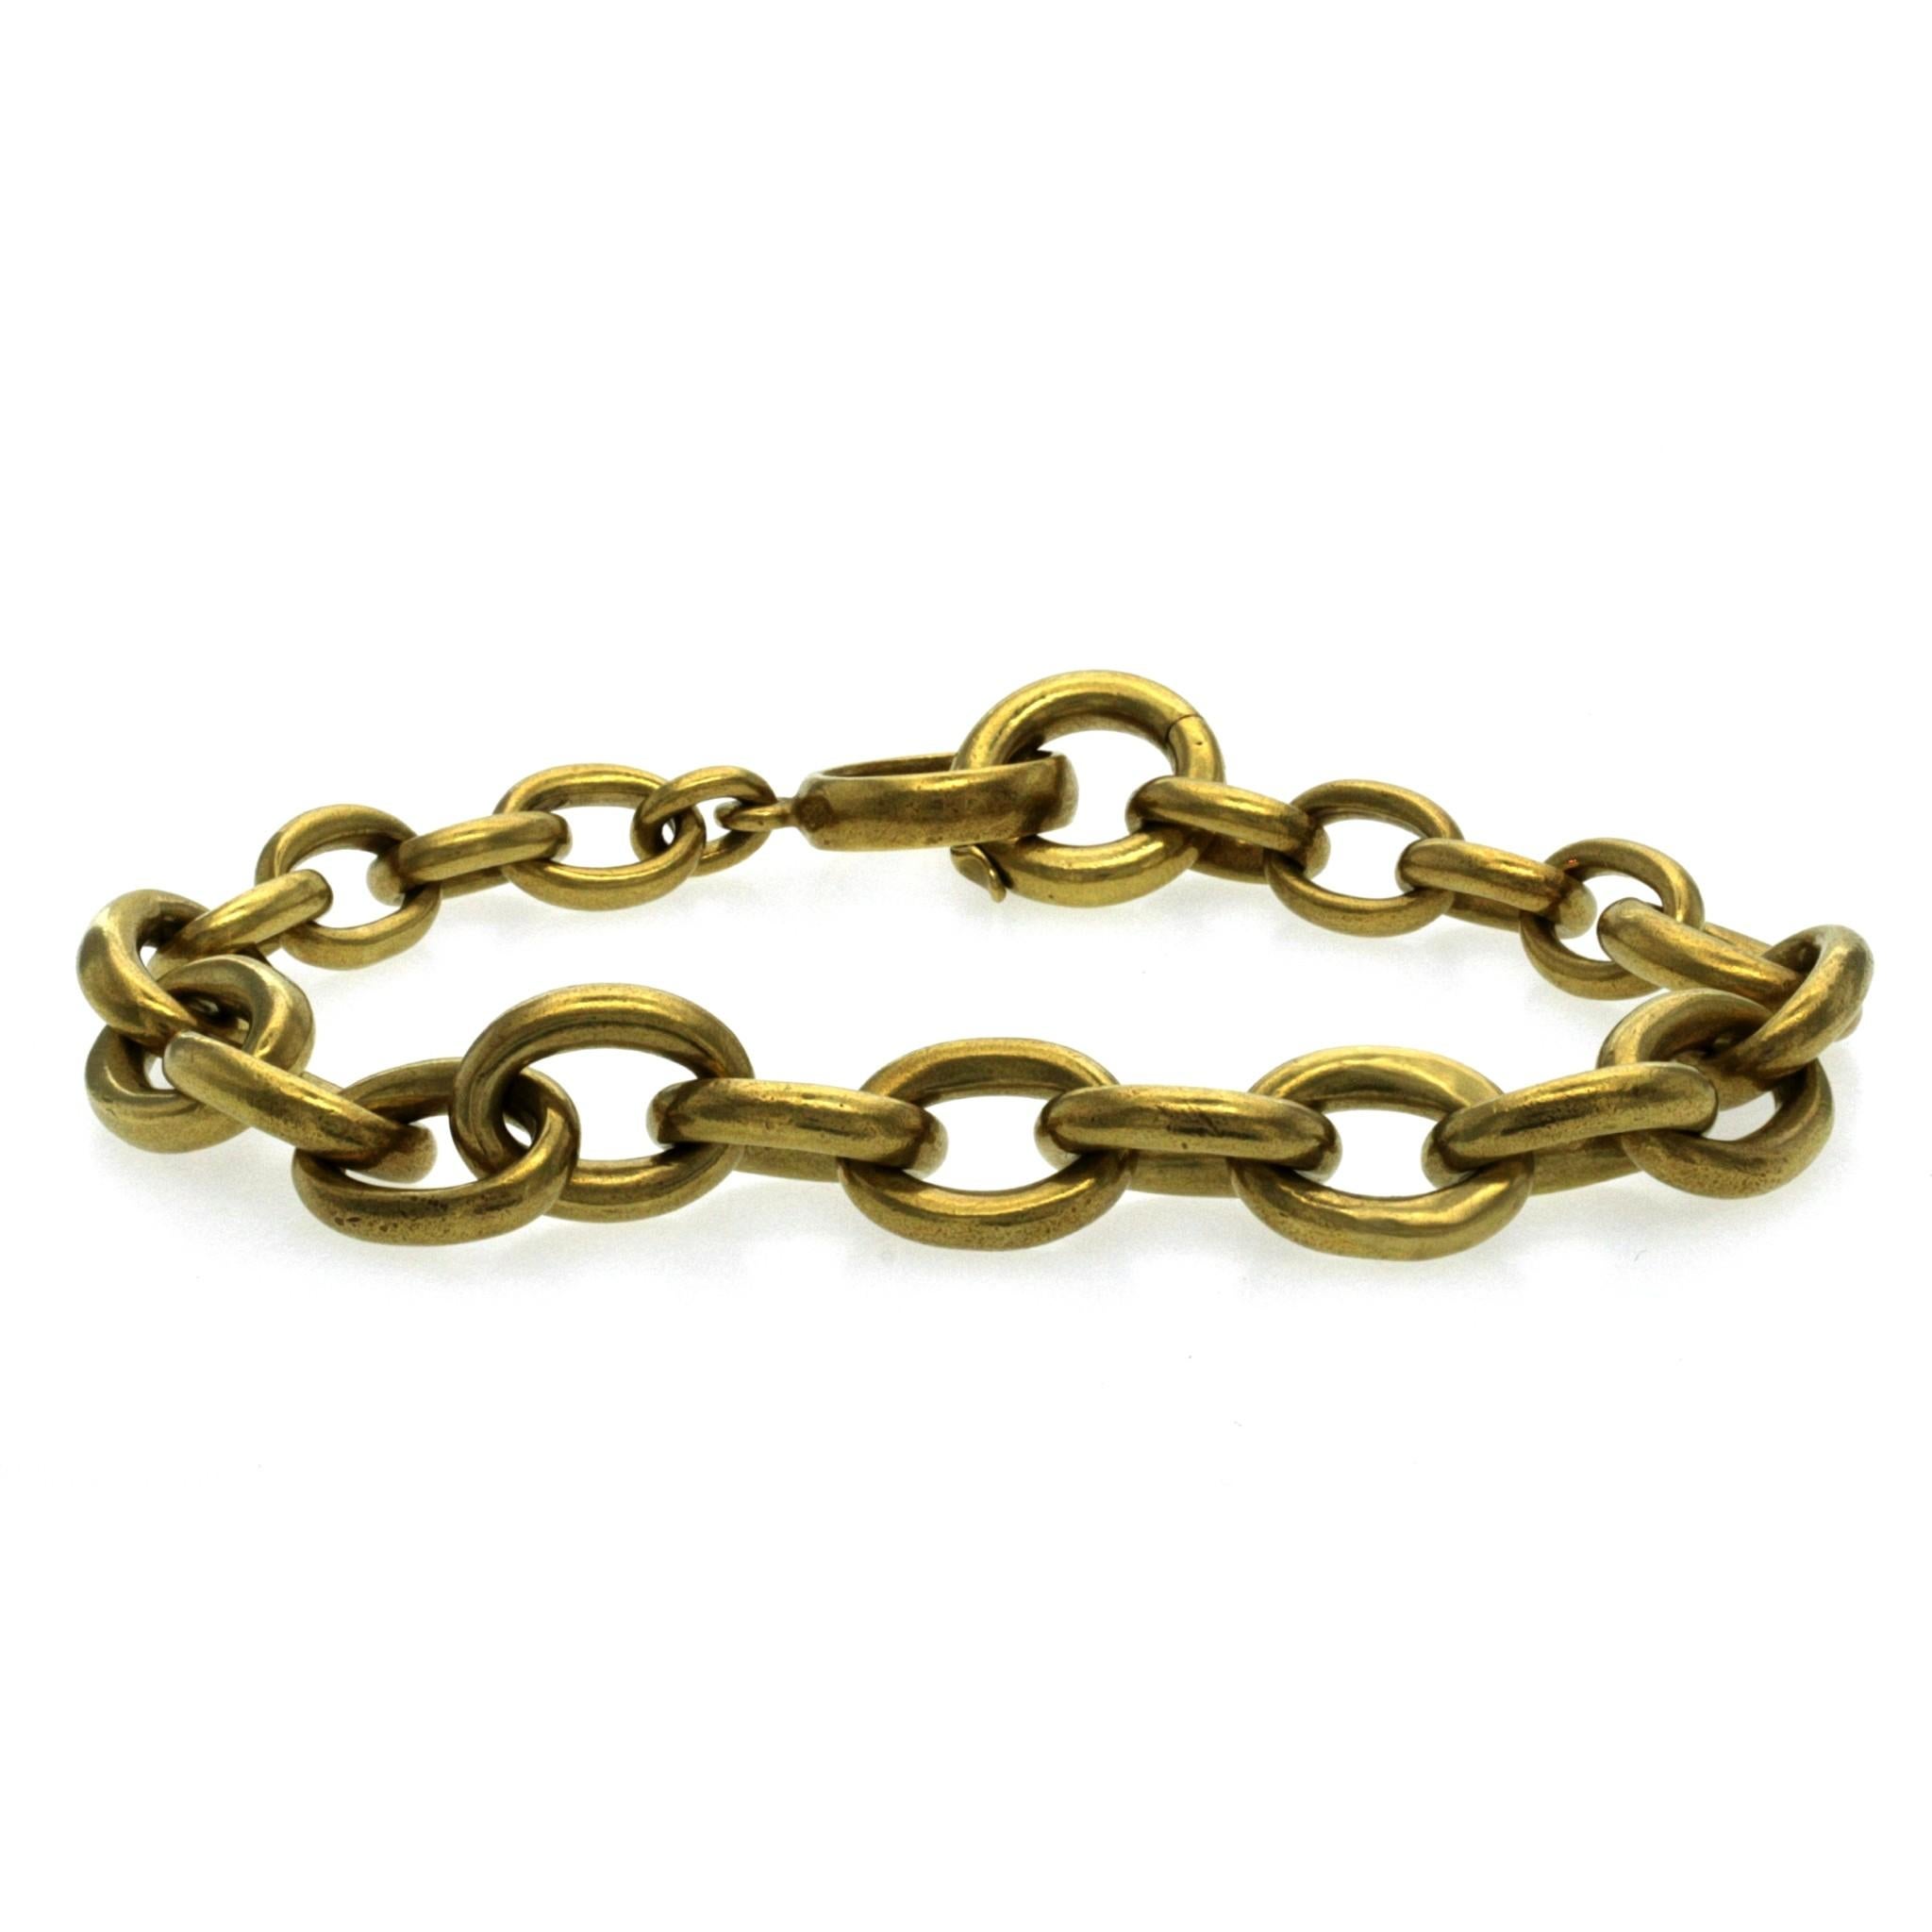 Authentic Kieselstein Cord 18 Karat Yellow Gold Link Bracelet In Excellent Condition For Sale In Los Angeles, CA